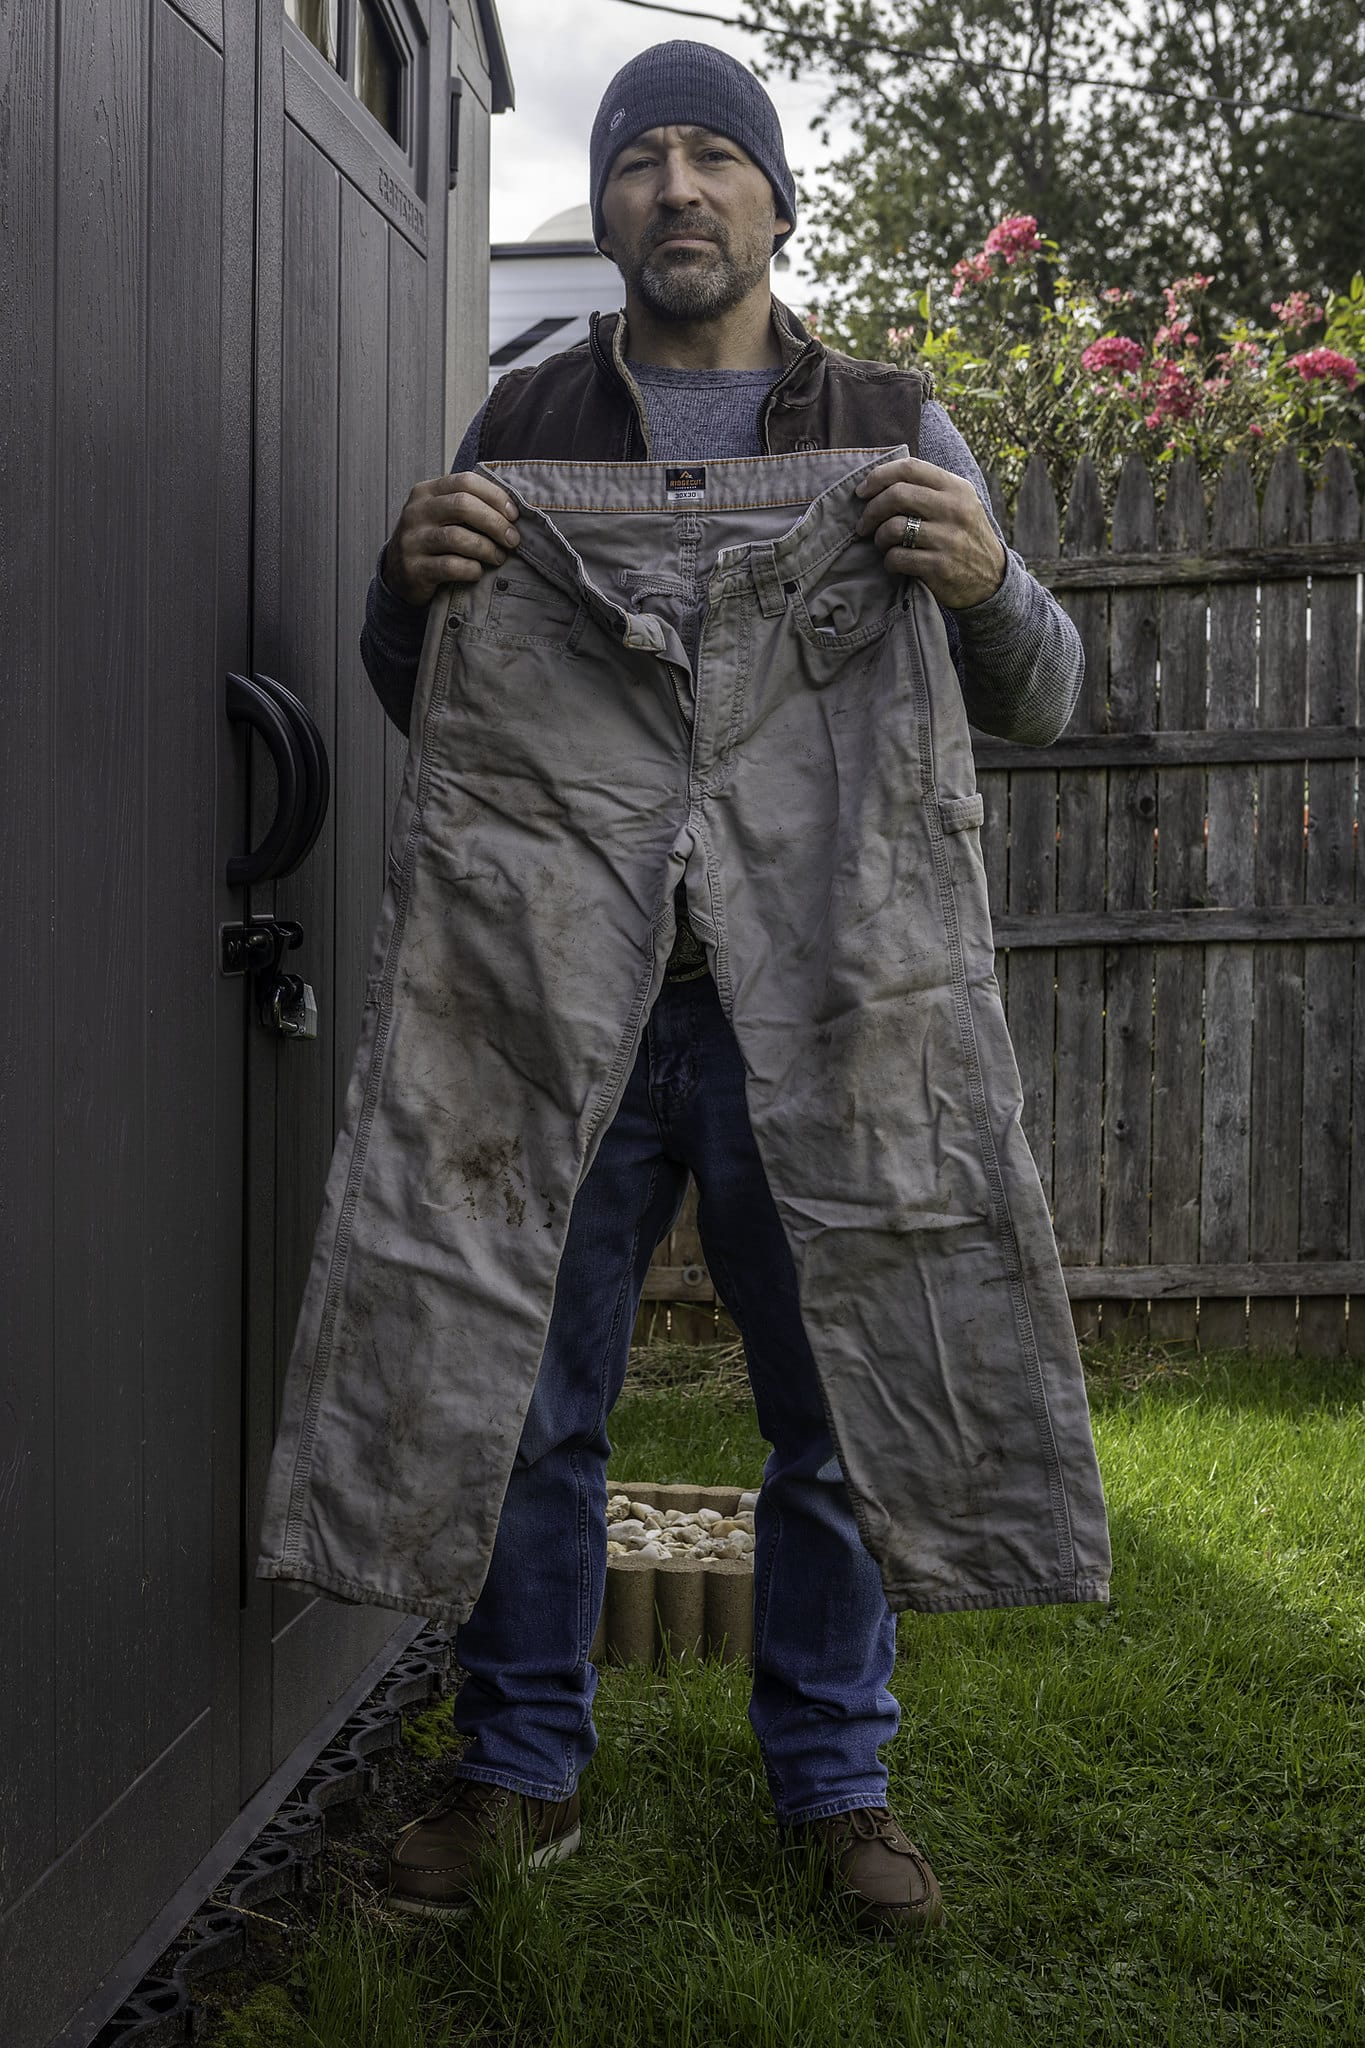 Eric Seppe in the backyard of his home holding the soiled work pants he wore on the day of the accident. (Note: the work pants were washed after the accident) © Steven Rubin for Public Herald